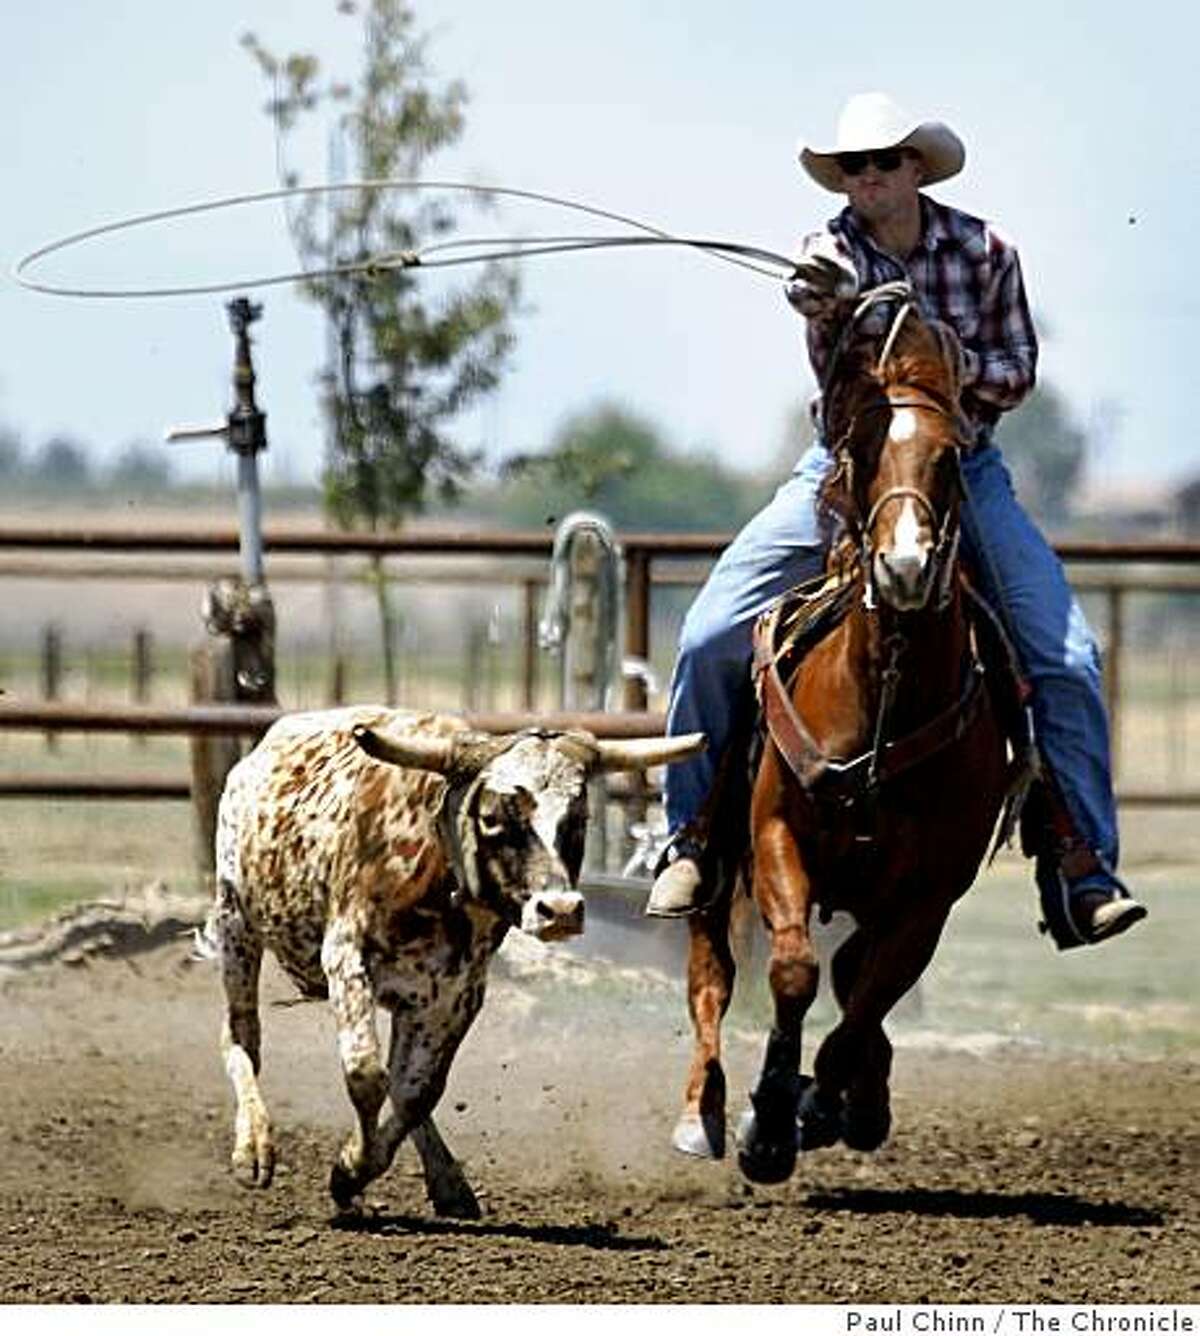 San Francisco 49ers draft pick Bear Pascoe ropes a steer on his family's cattle ranch in Terra Bella, Calif., on Thursday, May 14, 2009. The champion roper was drafted in the sixth-round as a tight end from Fresno State.